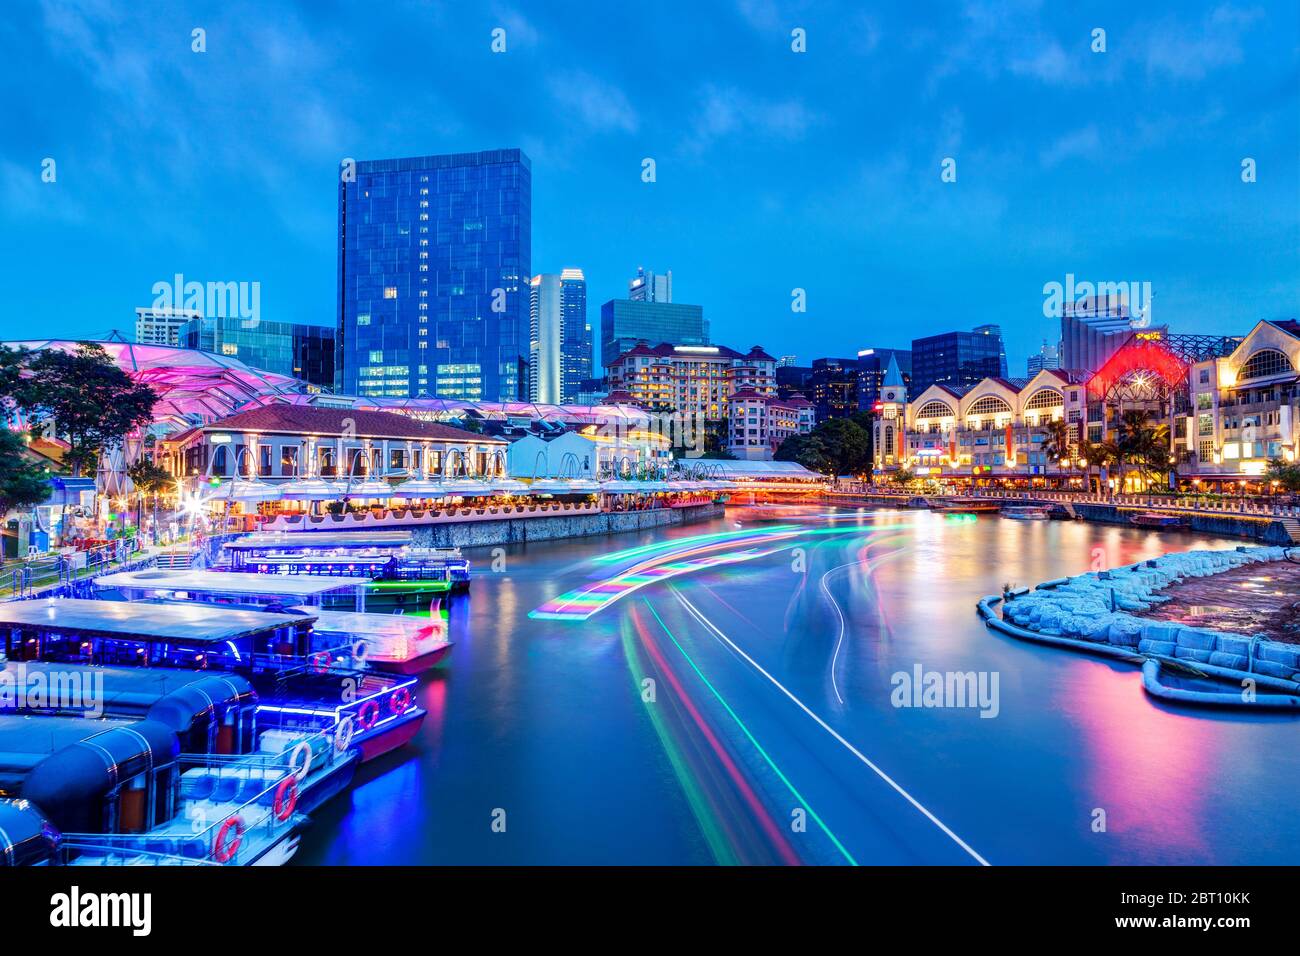 Sunset night life at Clarke Quay on Singapore River as colorful light trails from river boats and surrounding bars and restaurants light up the popula Stock Photo